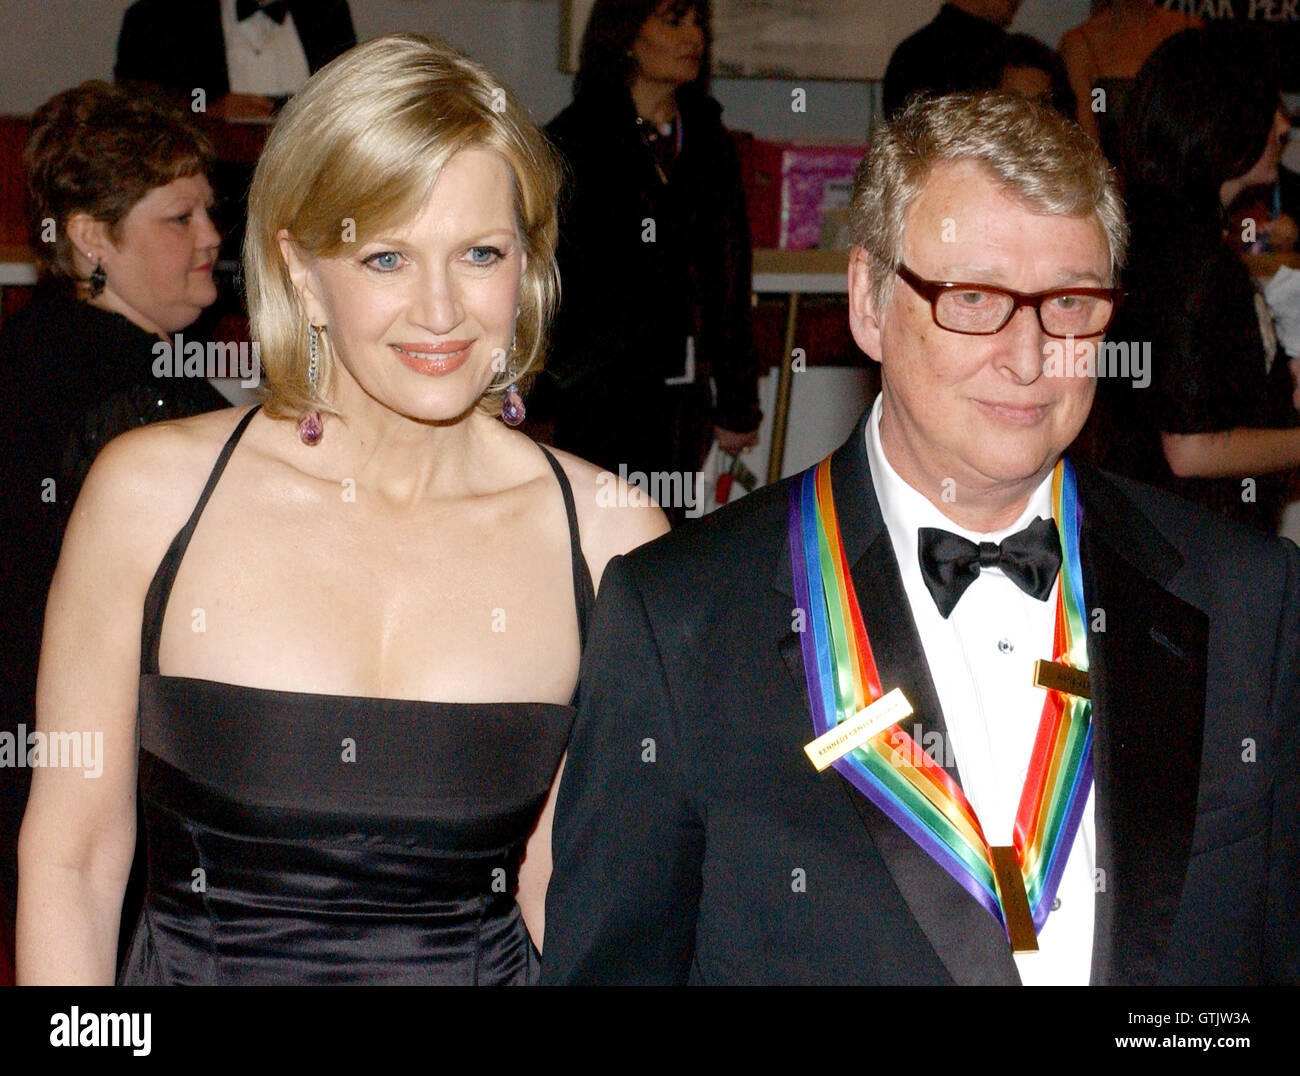 It was announced today that famed Director Mike Nichols passed away suddenly on Wednesday, November 20, 2014 at age 83.  In this file photo from December 7, 2003, he is pictured with his wife, Diane Sawyer, as they arrive at the John F. Kennedy Center for Stock Photo